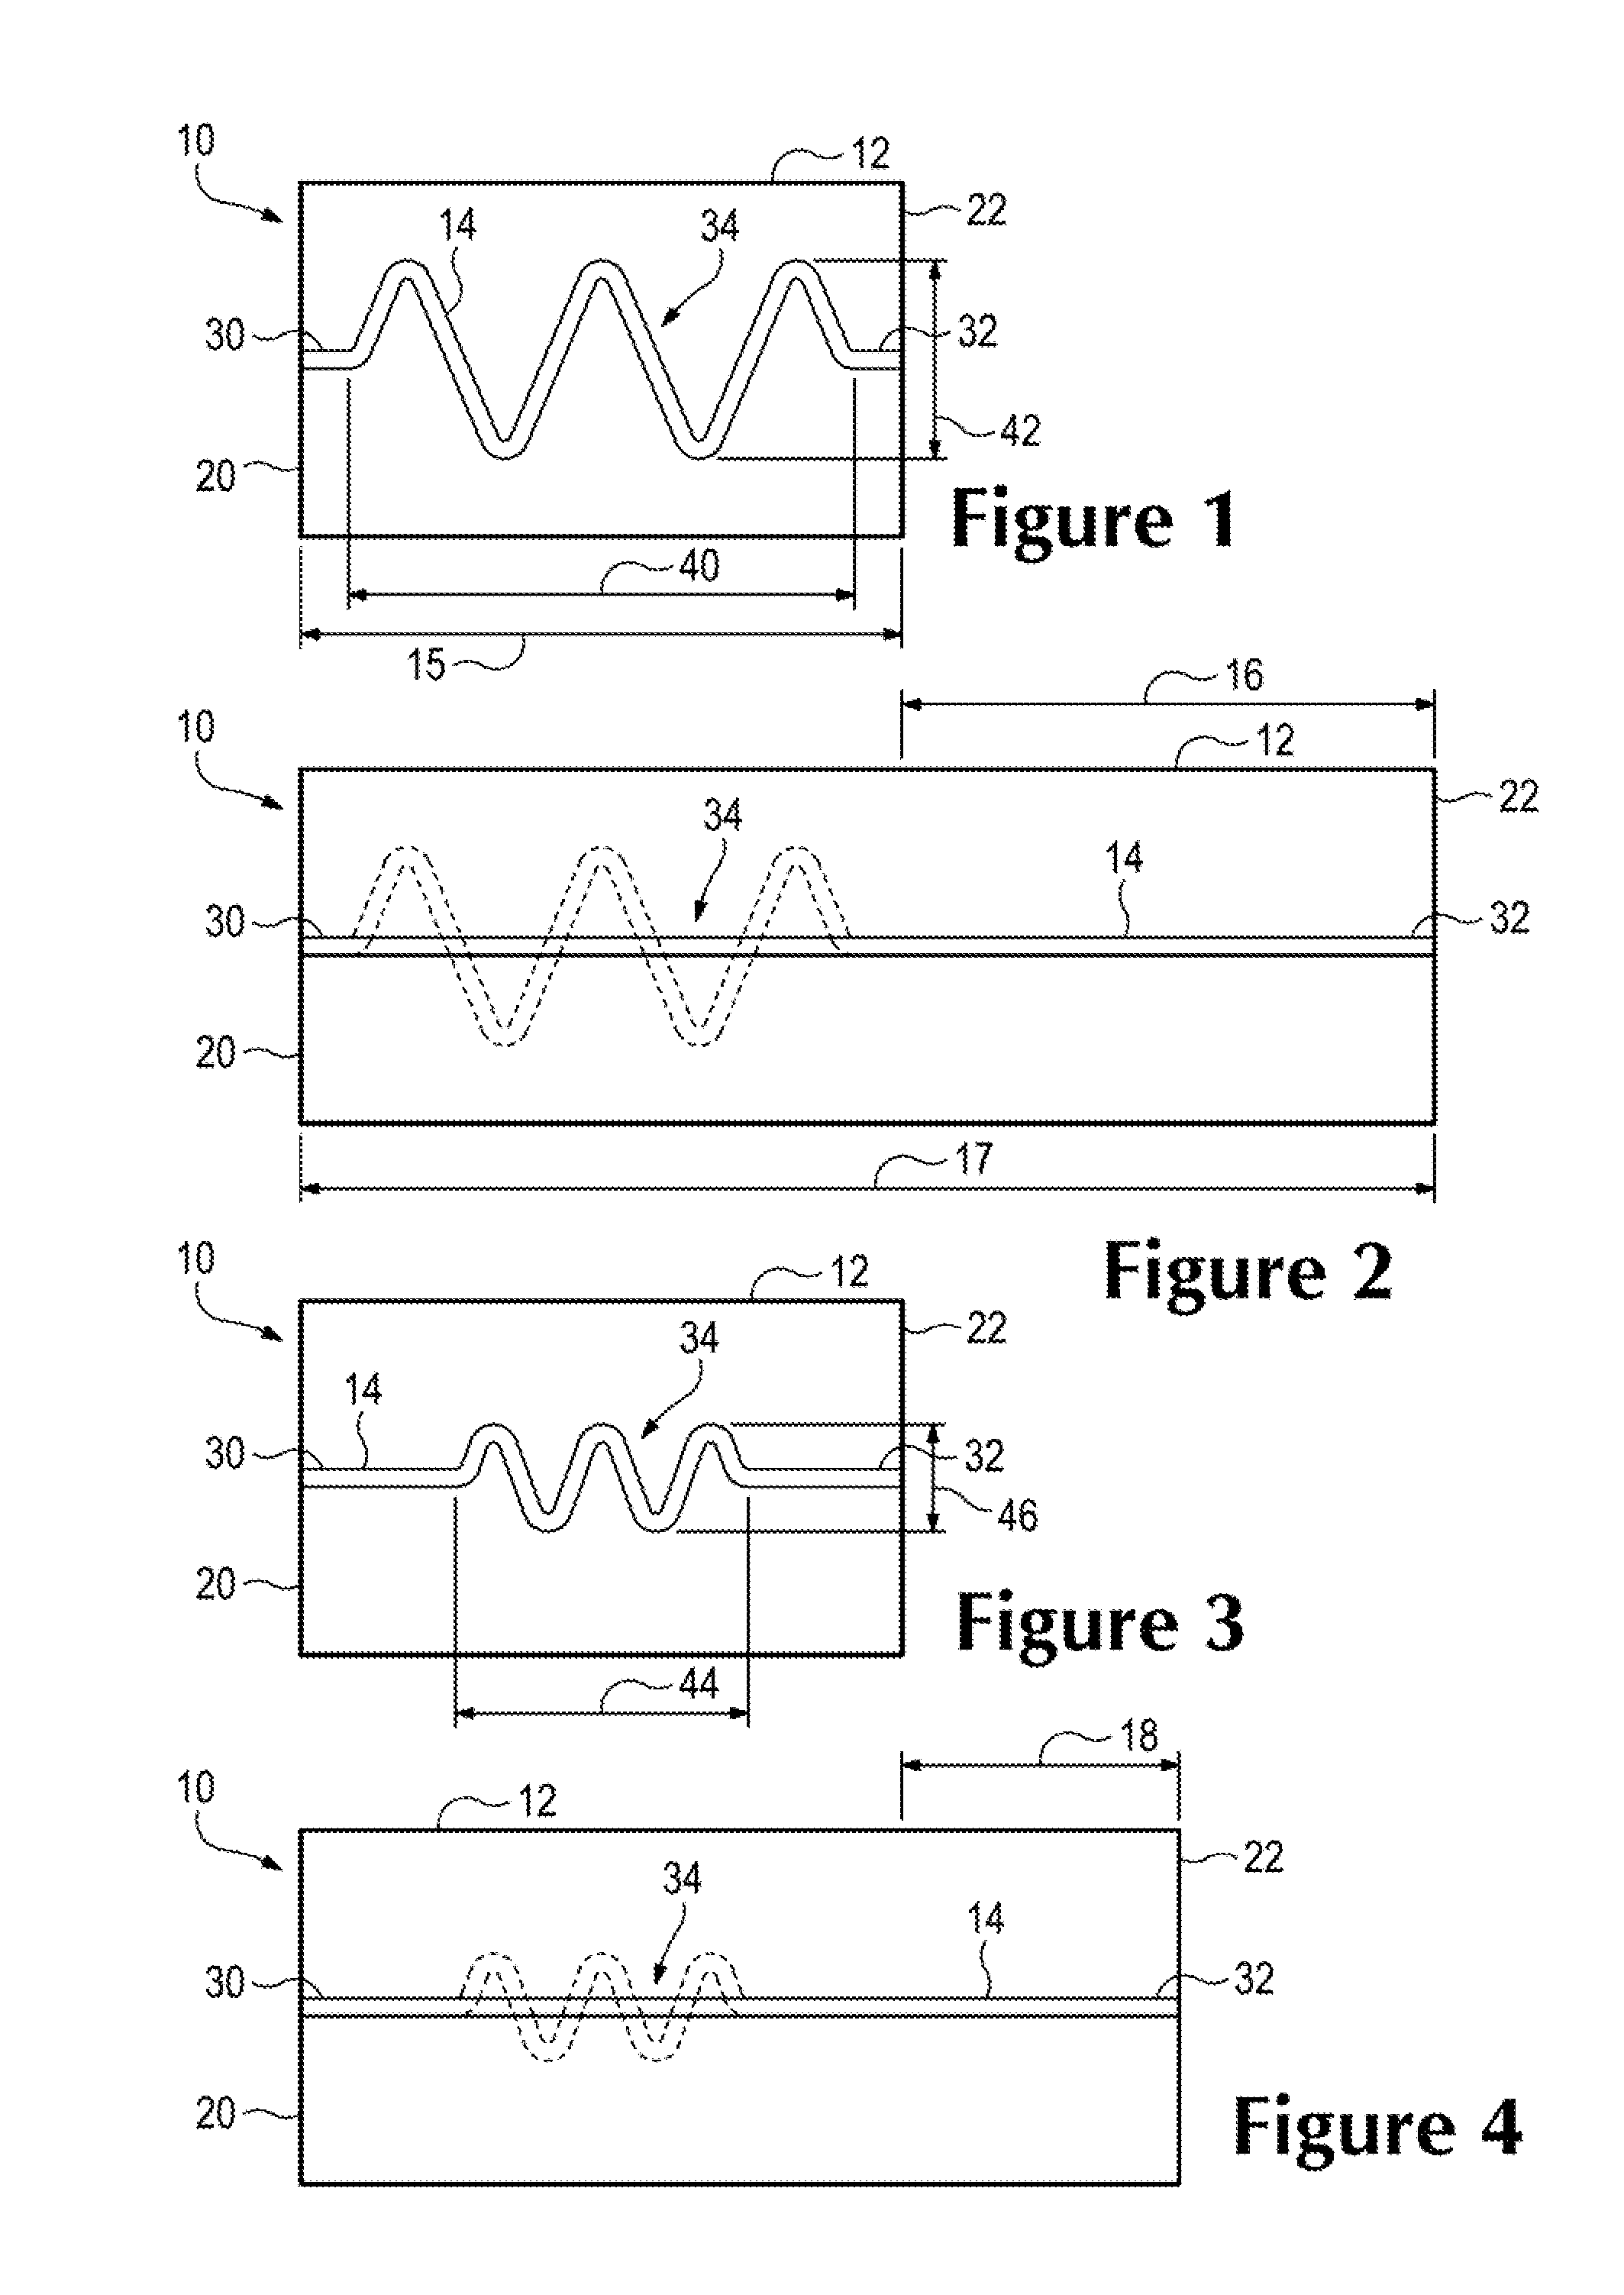 Article Incorporating A Knitted Component With Zonal Stretch Limiter